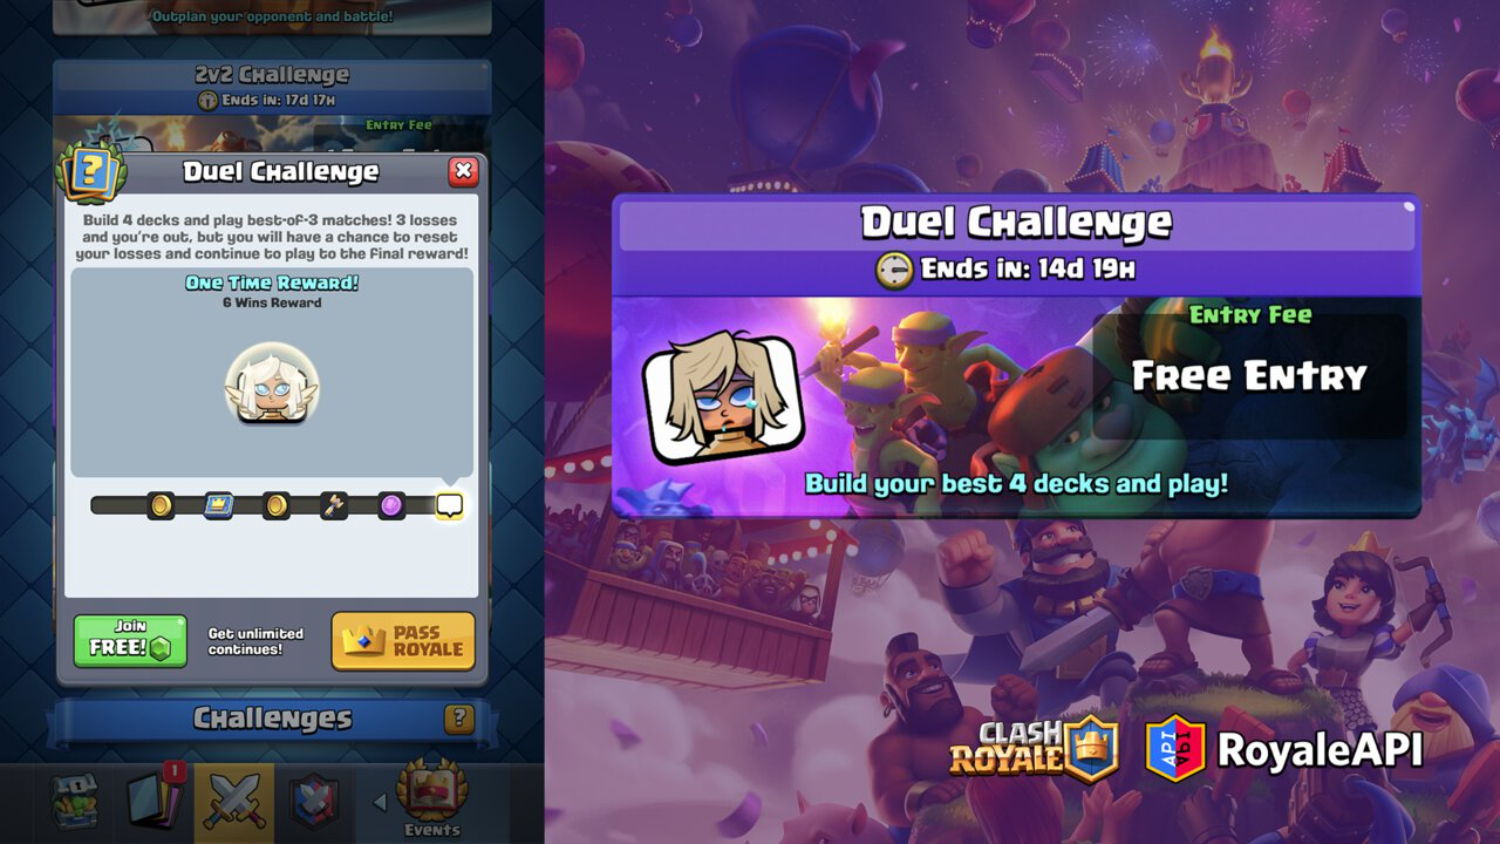 complete challenges and participate in events